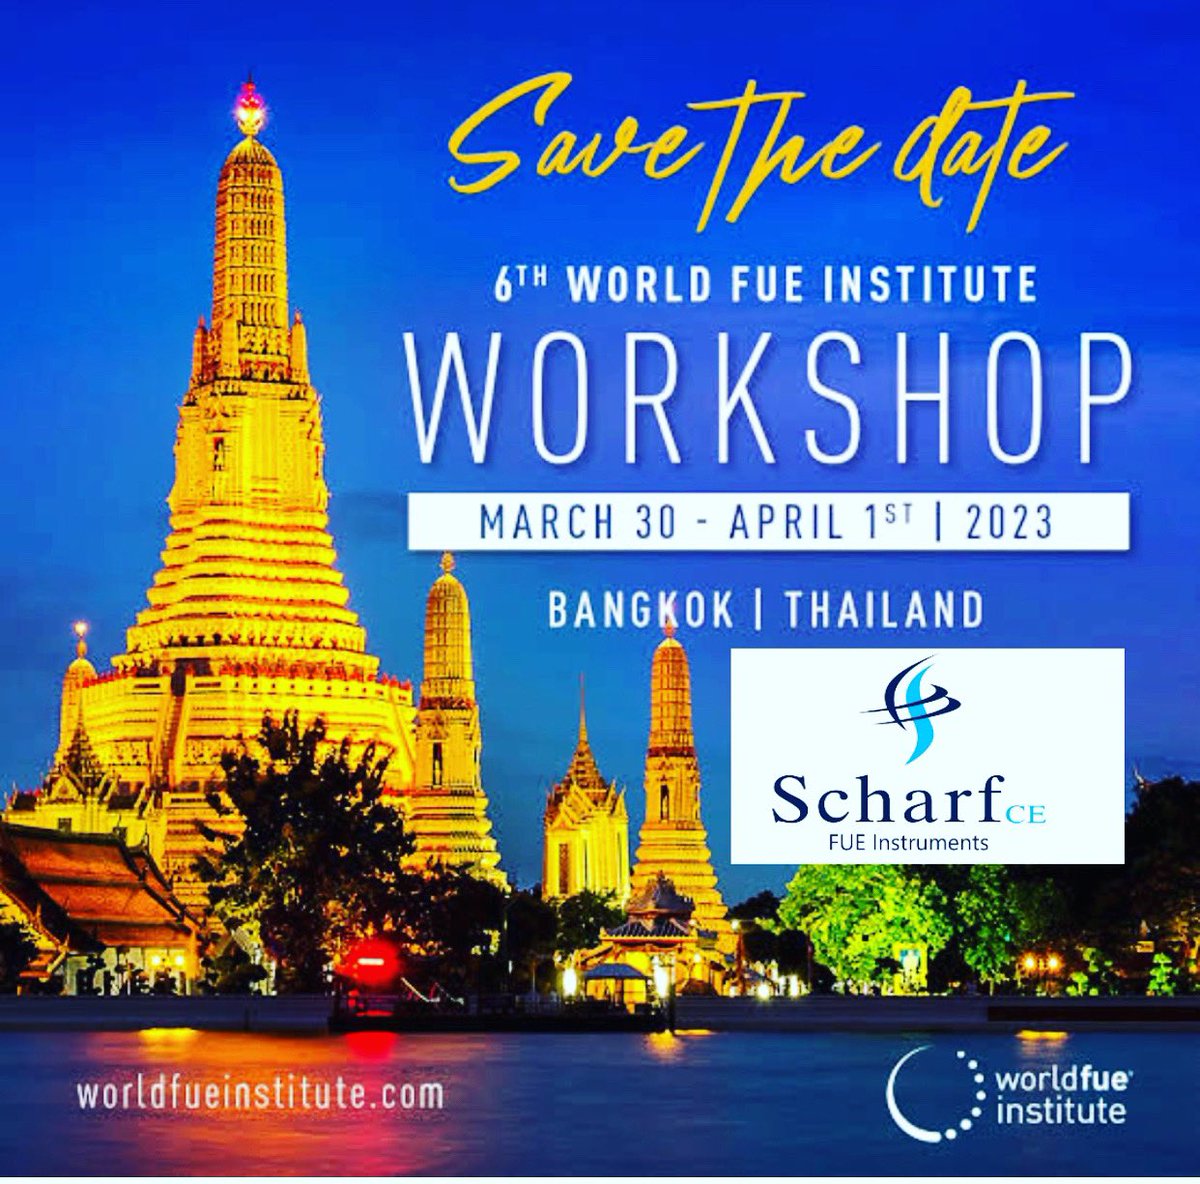 Join us 6th Annual World FUE Institute Conference
For details : scharfmed.com

#hairtransplant #hairtransplantation #hairtransplantsurgery #hairsurgery #bangkok #fuehairtransplant #fueworkshop #hairtransplantisntruments #fuepunches #fuetraining #ishrs